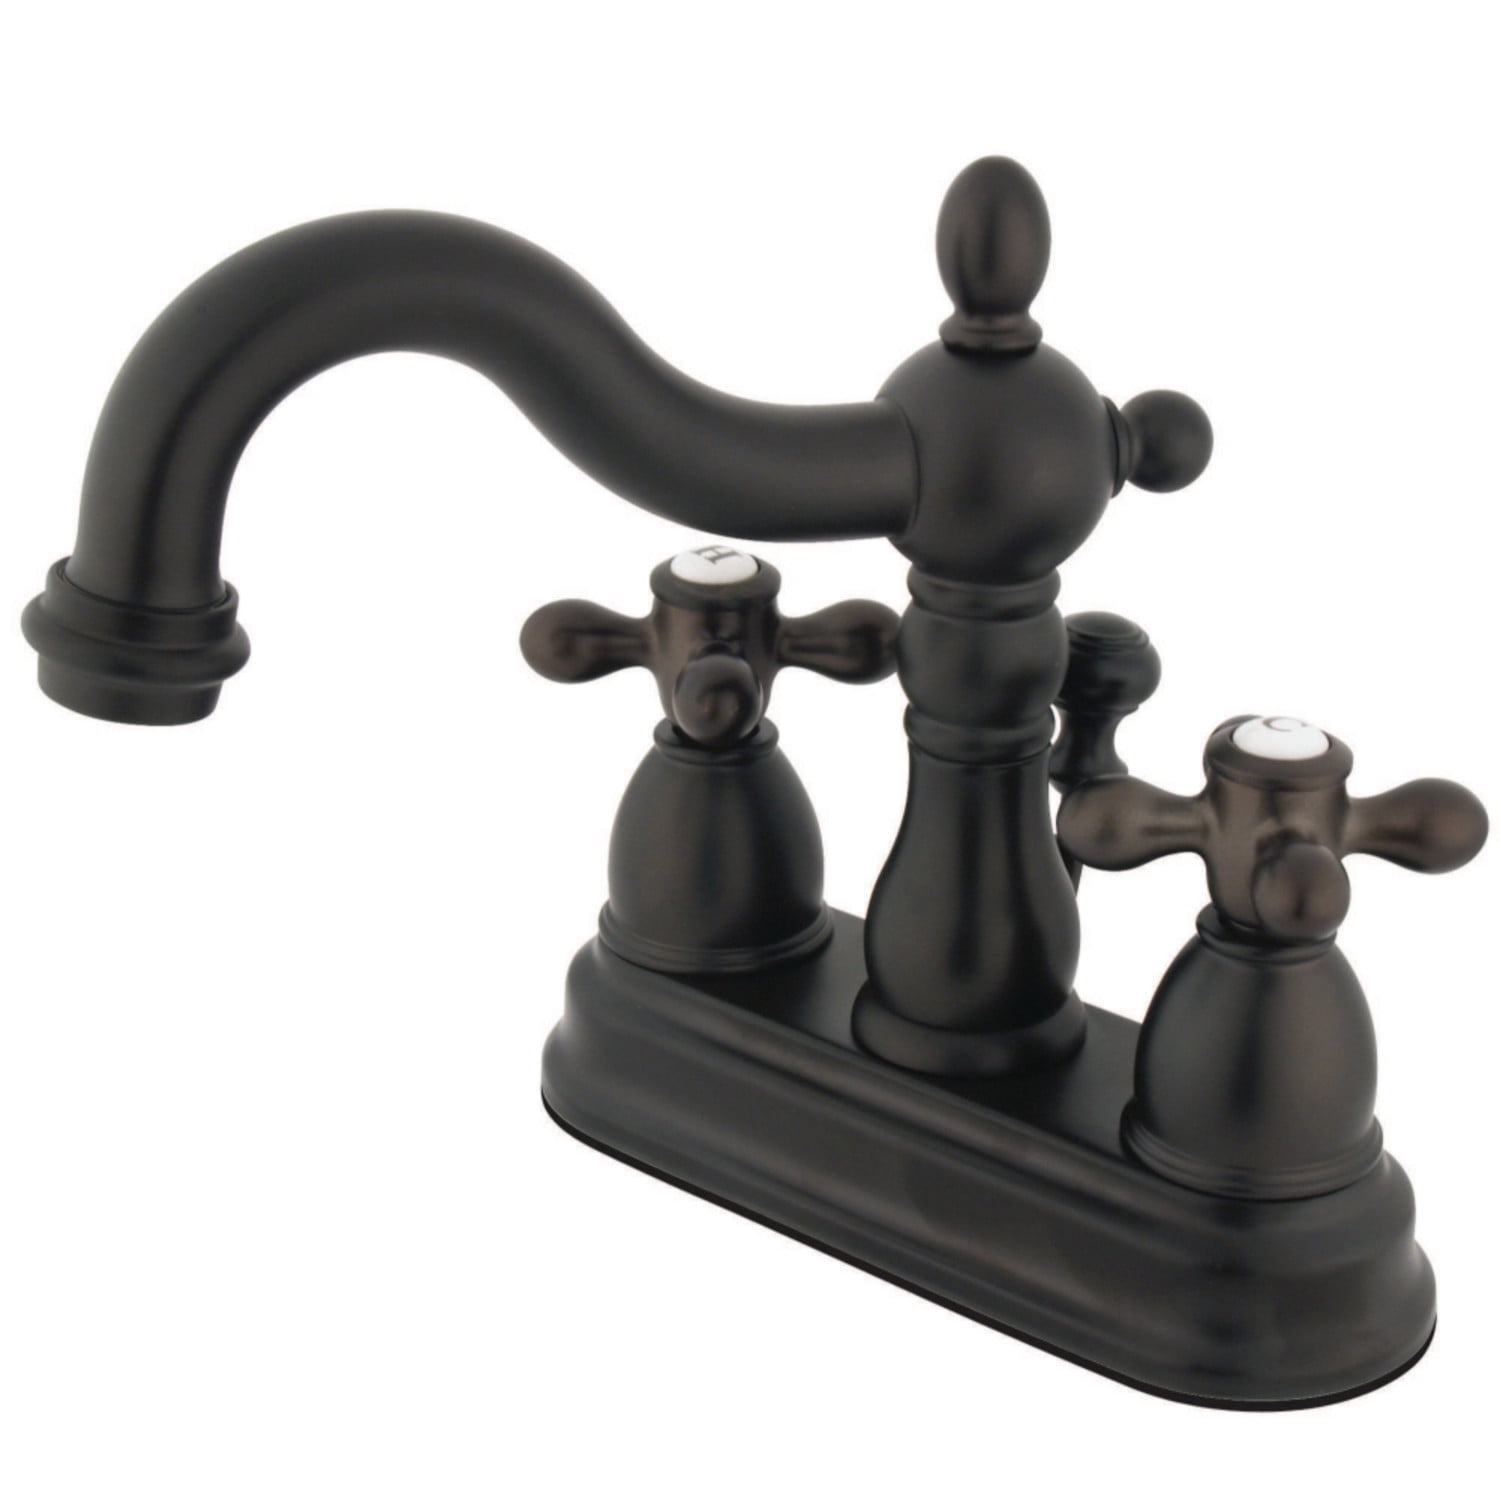 Kingston Brass KB1605AX Heritage 4 in. Centerset Bathroom Faucet, Oil Rubbed Bronze